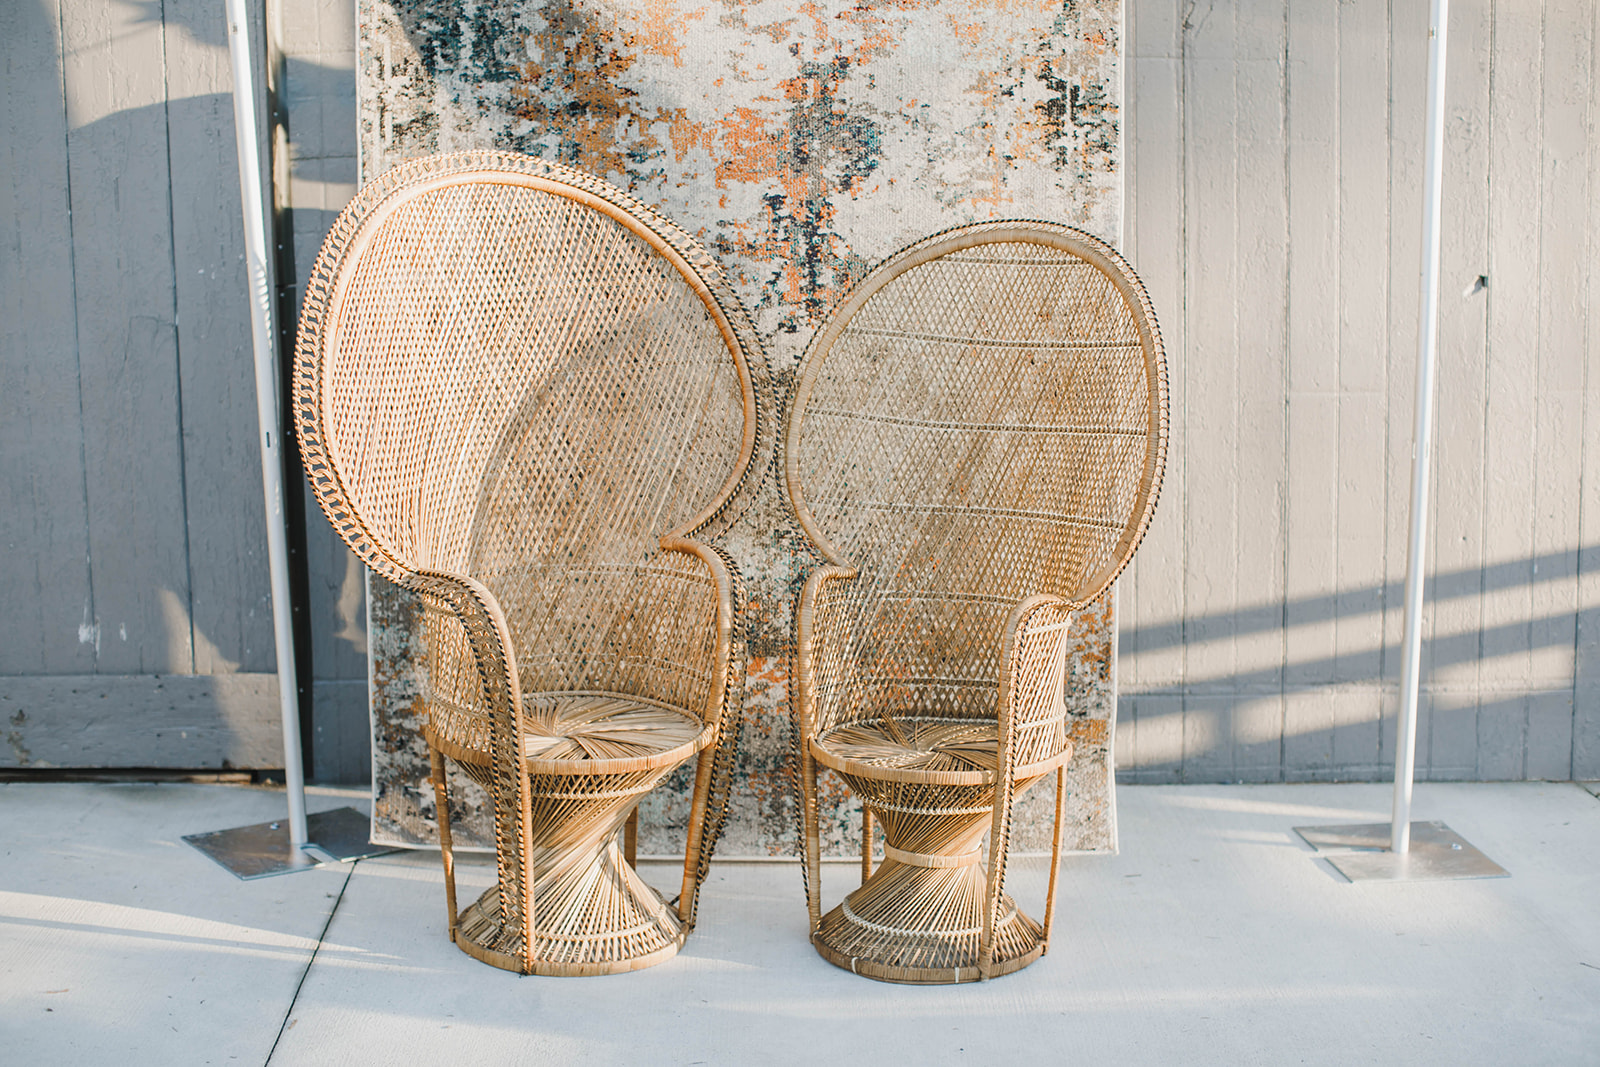 Bodhi Wicker Peacock Chair Rental - A to Z Event Rentals, LLC.